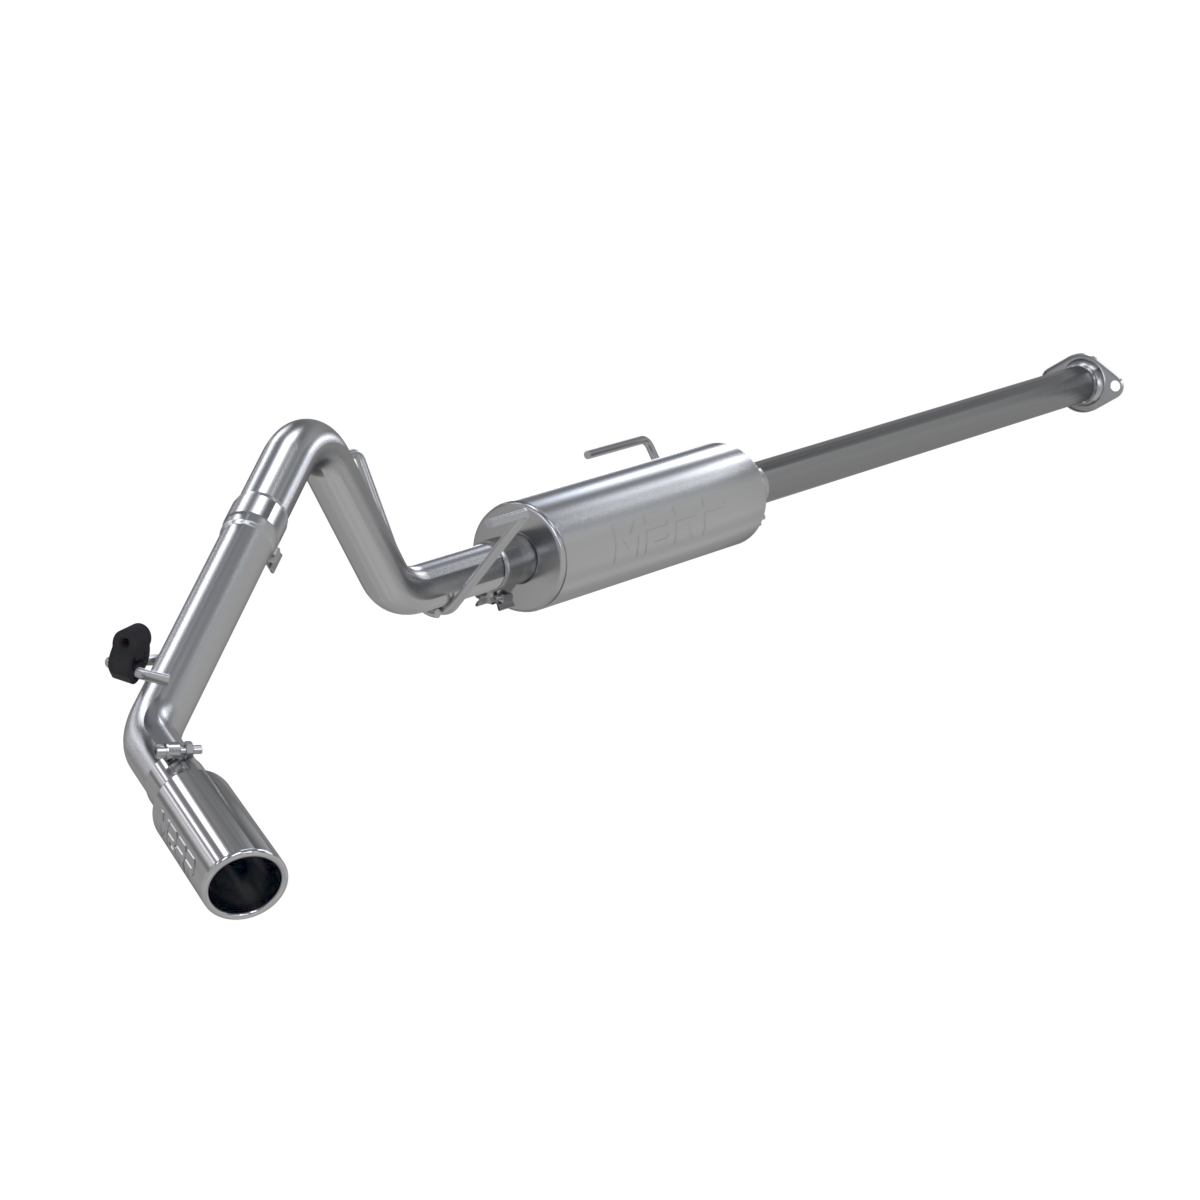 MBRP - MBRP Cat Back Exhaust System Single Side Black Aluminized Steel For 05-15 Toyota Tacoma 4.0L Extended Cab/Crew Cab S5326AL